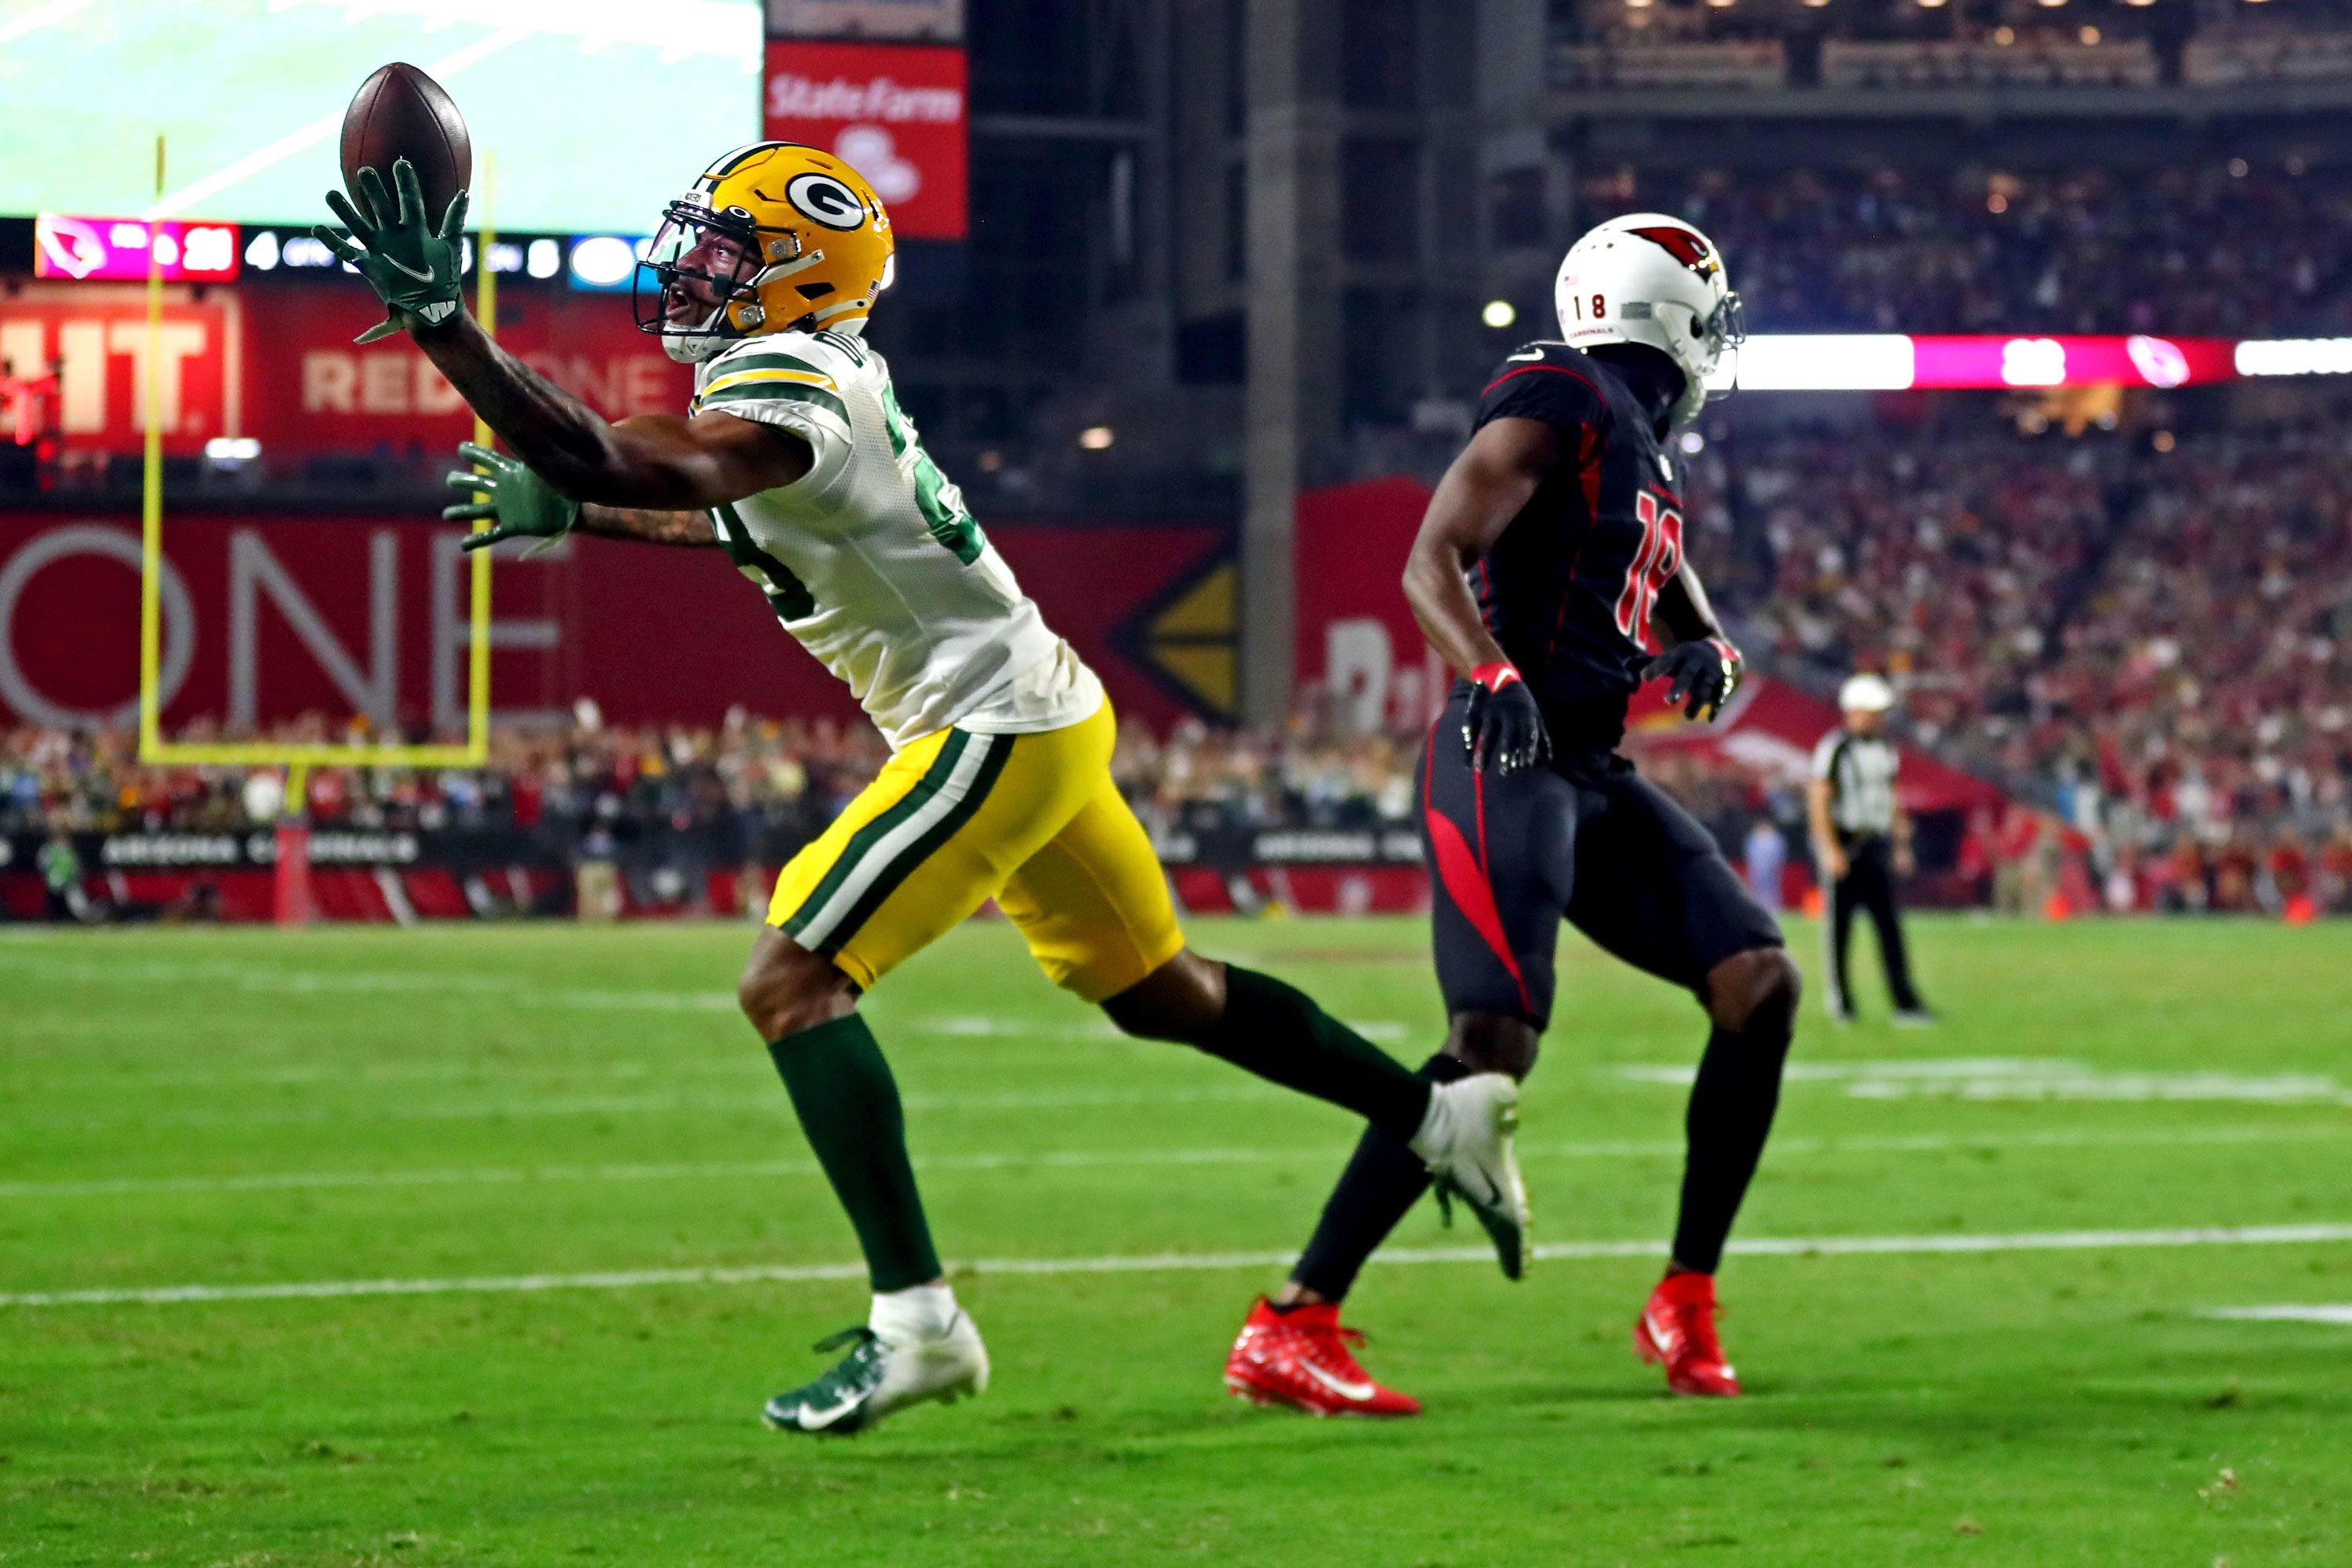 Cardinals vs Packers: No more undefeated teams in NFL as Arizona loses on  last-second interception